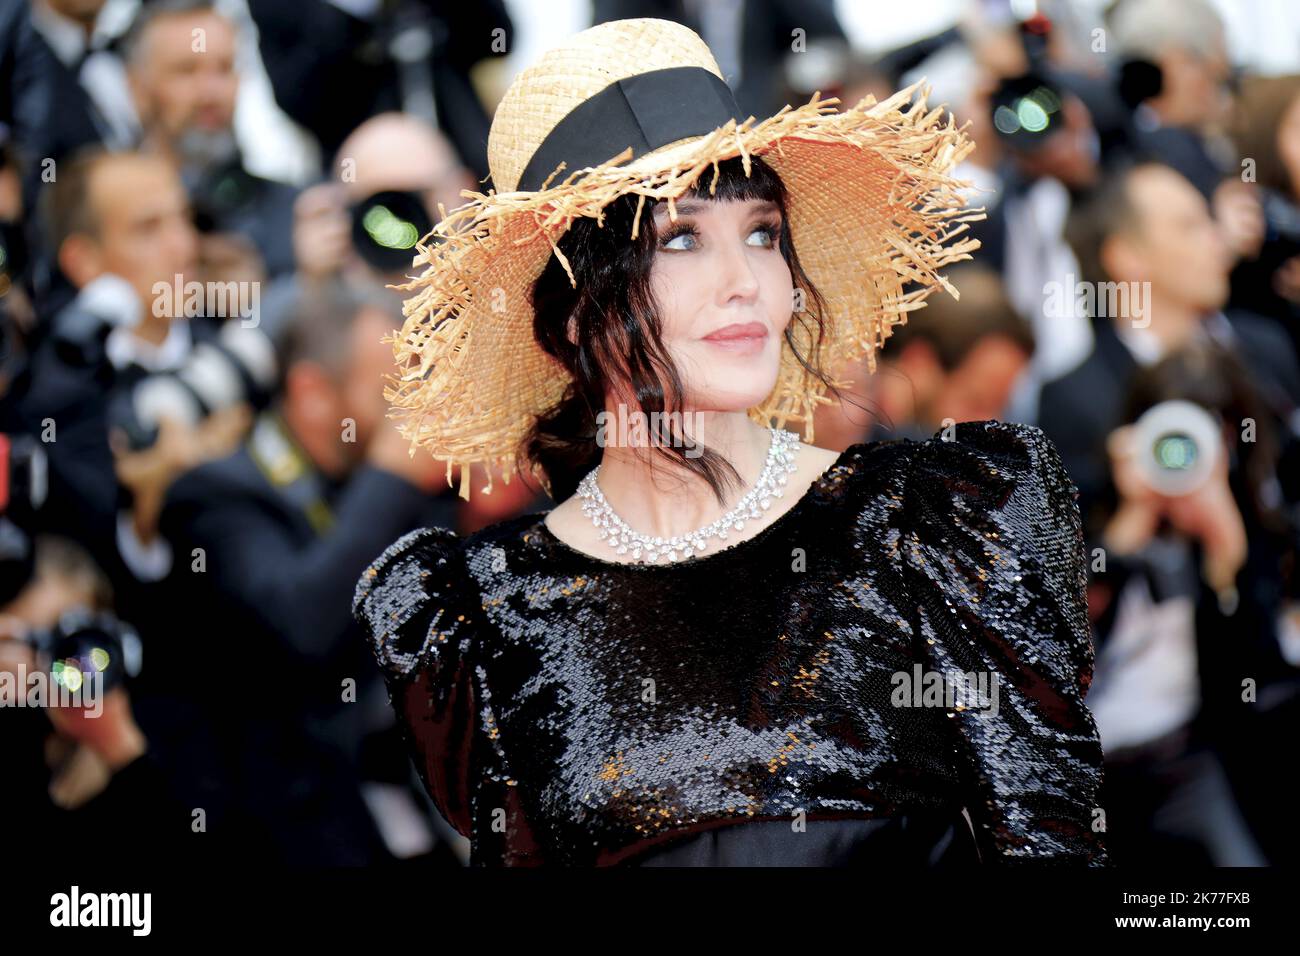 French actress Isabelle Adjani arrives for the screening of 'La Belle Epoque' during the 72nd annual Cannes Film Festival, in Cannes, France, 20 May 2019. The movie is presented out of competition at the festival which runs from 14 to 25 May. Stock Photo